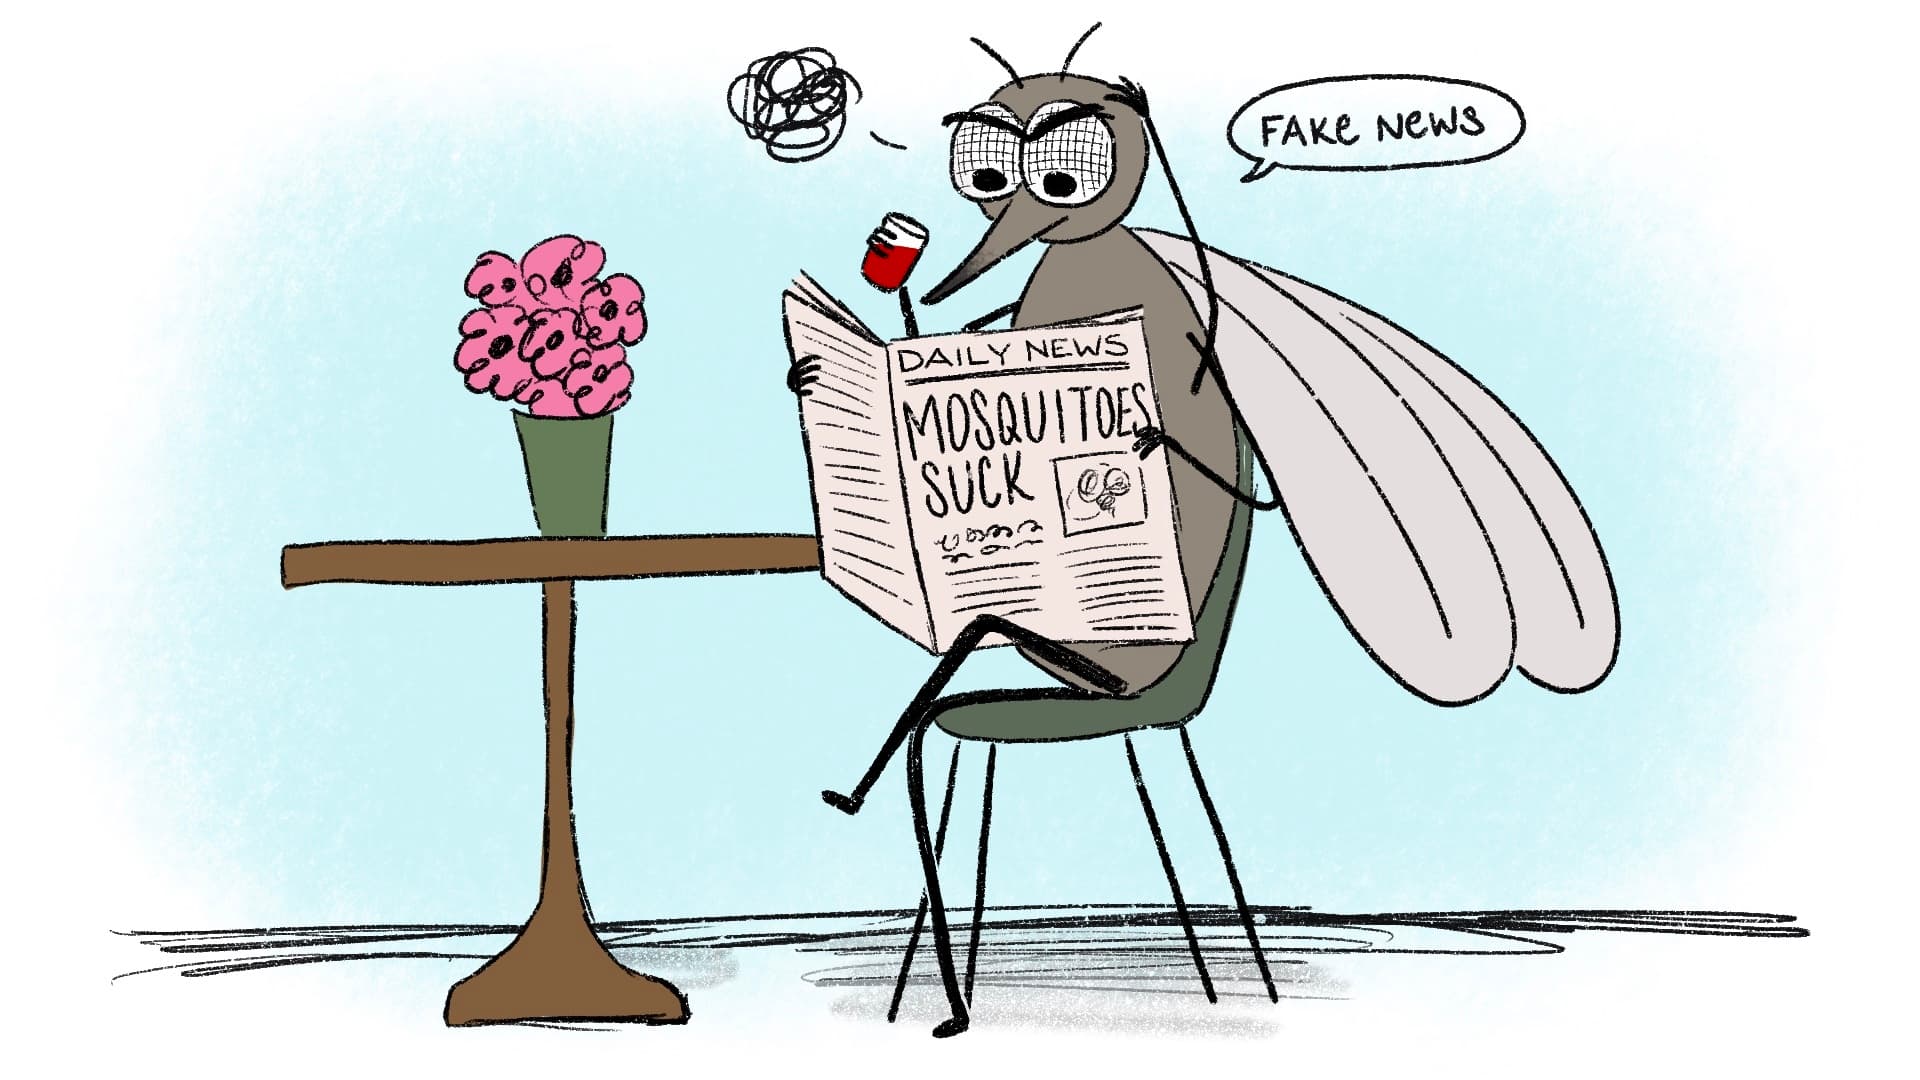 mosquito reading a newspaper that reads, "Daily News: Mosquitoes Suck" and saying, "Fake News."